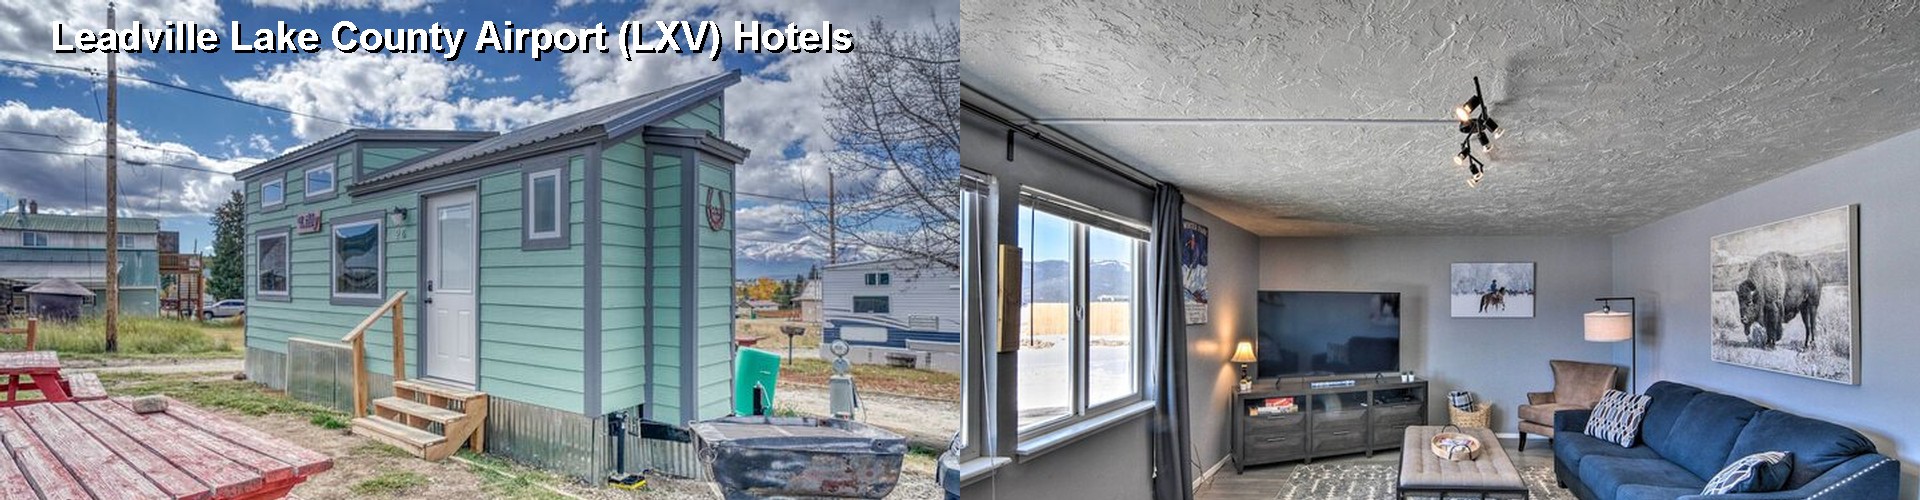 5 Best Hotels near Leadville Lake County Airport (LXV)